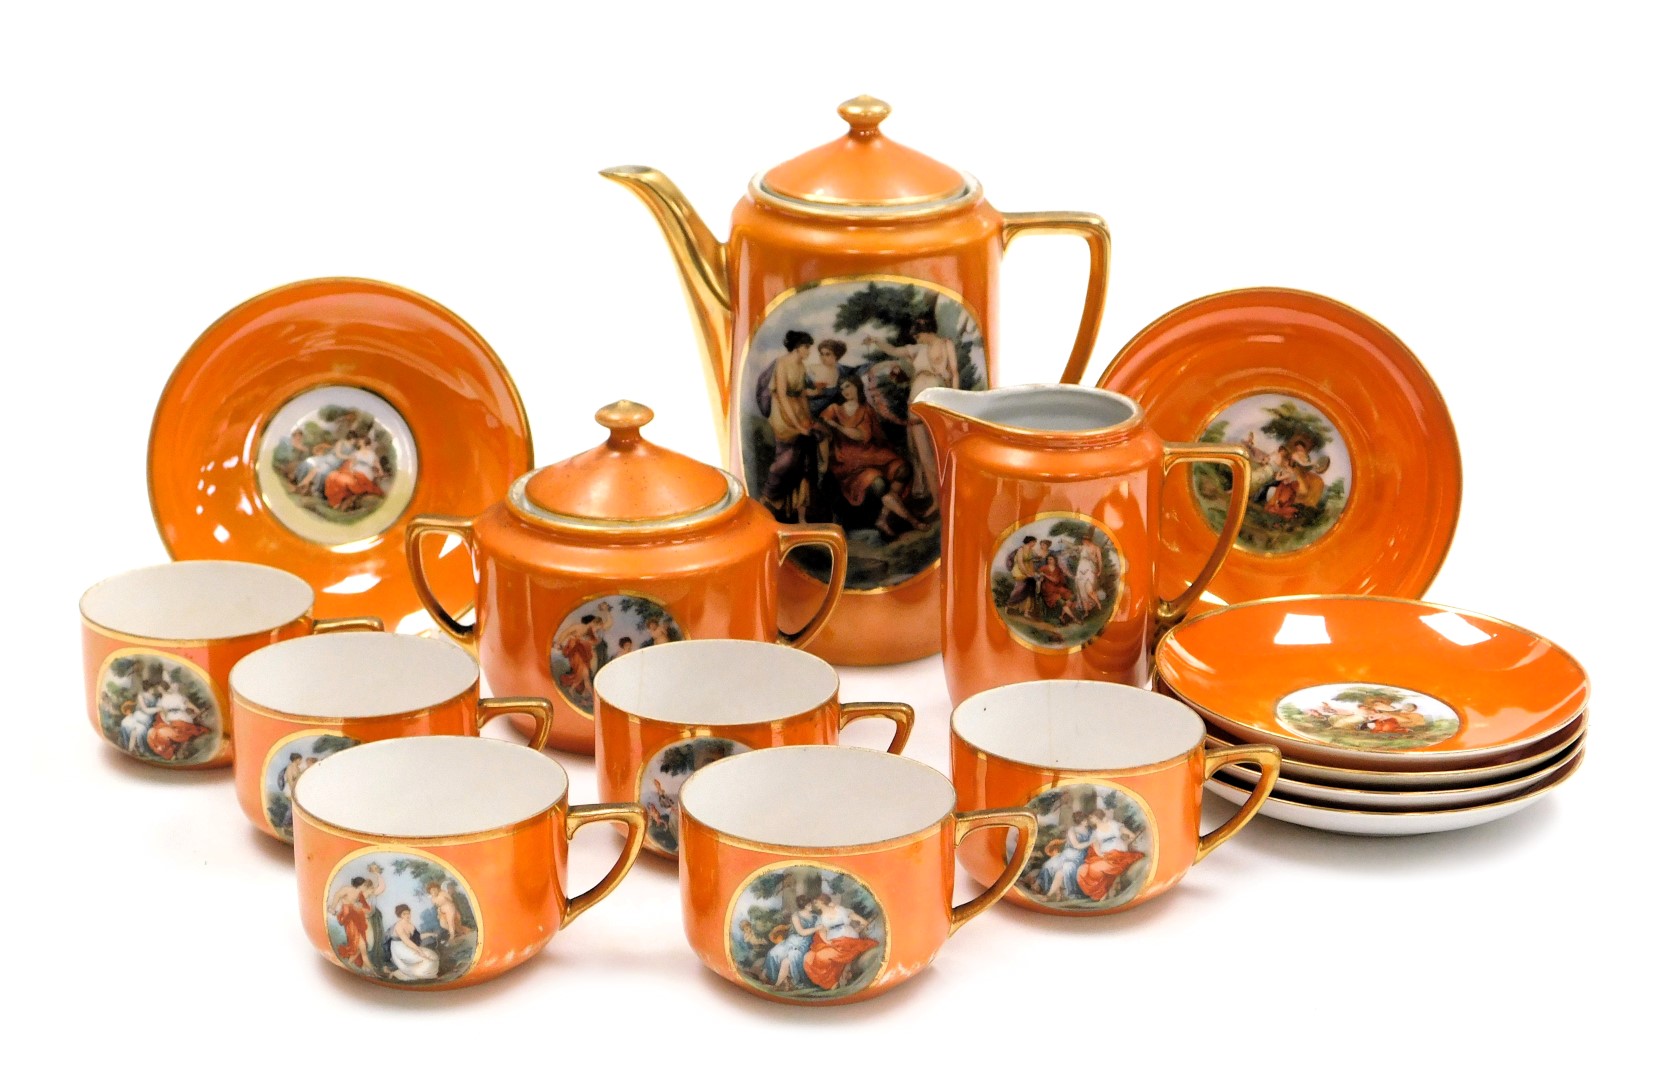 An early 20thC Czechoslovakian porcelain part coffee service, decorated with classical muses, agains